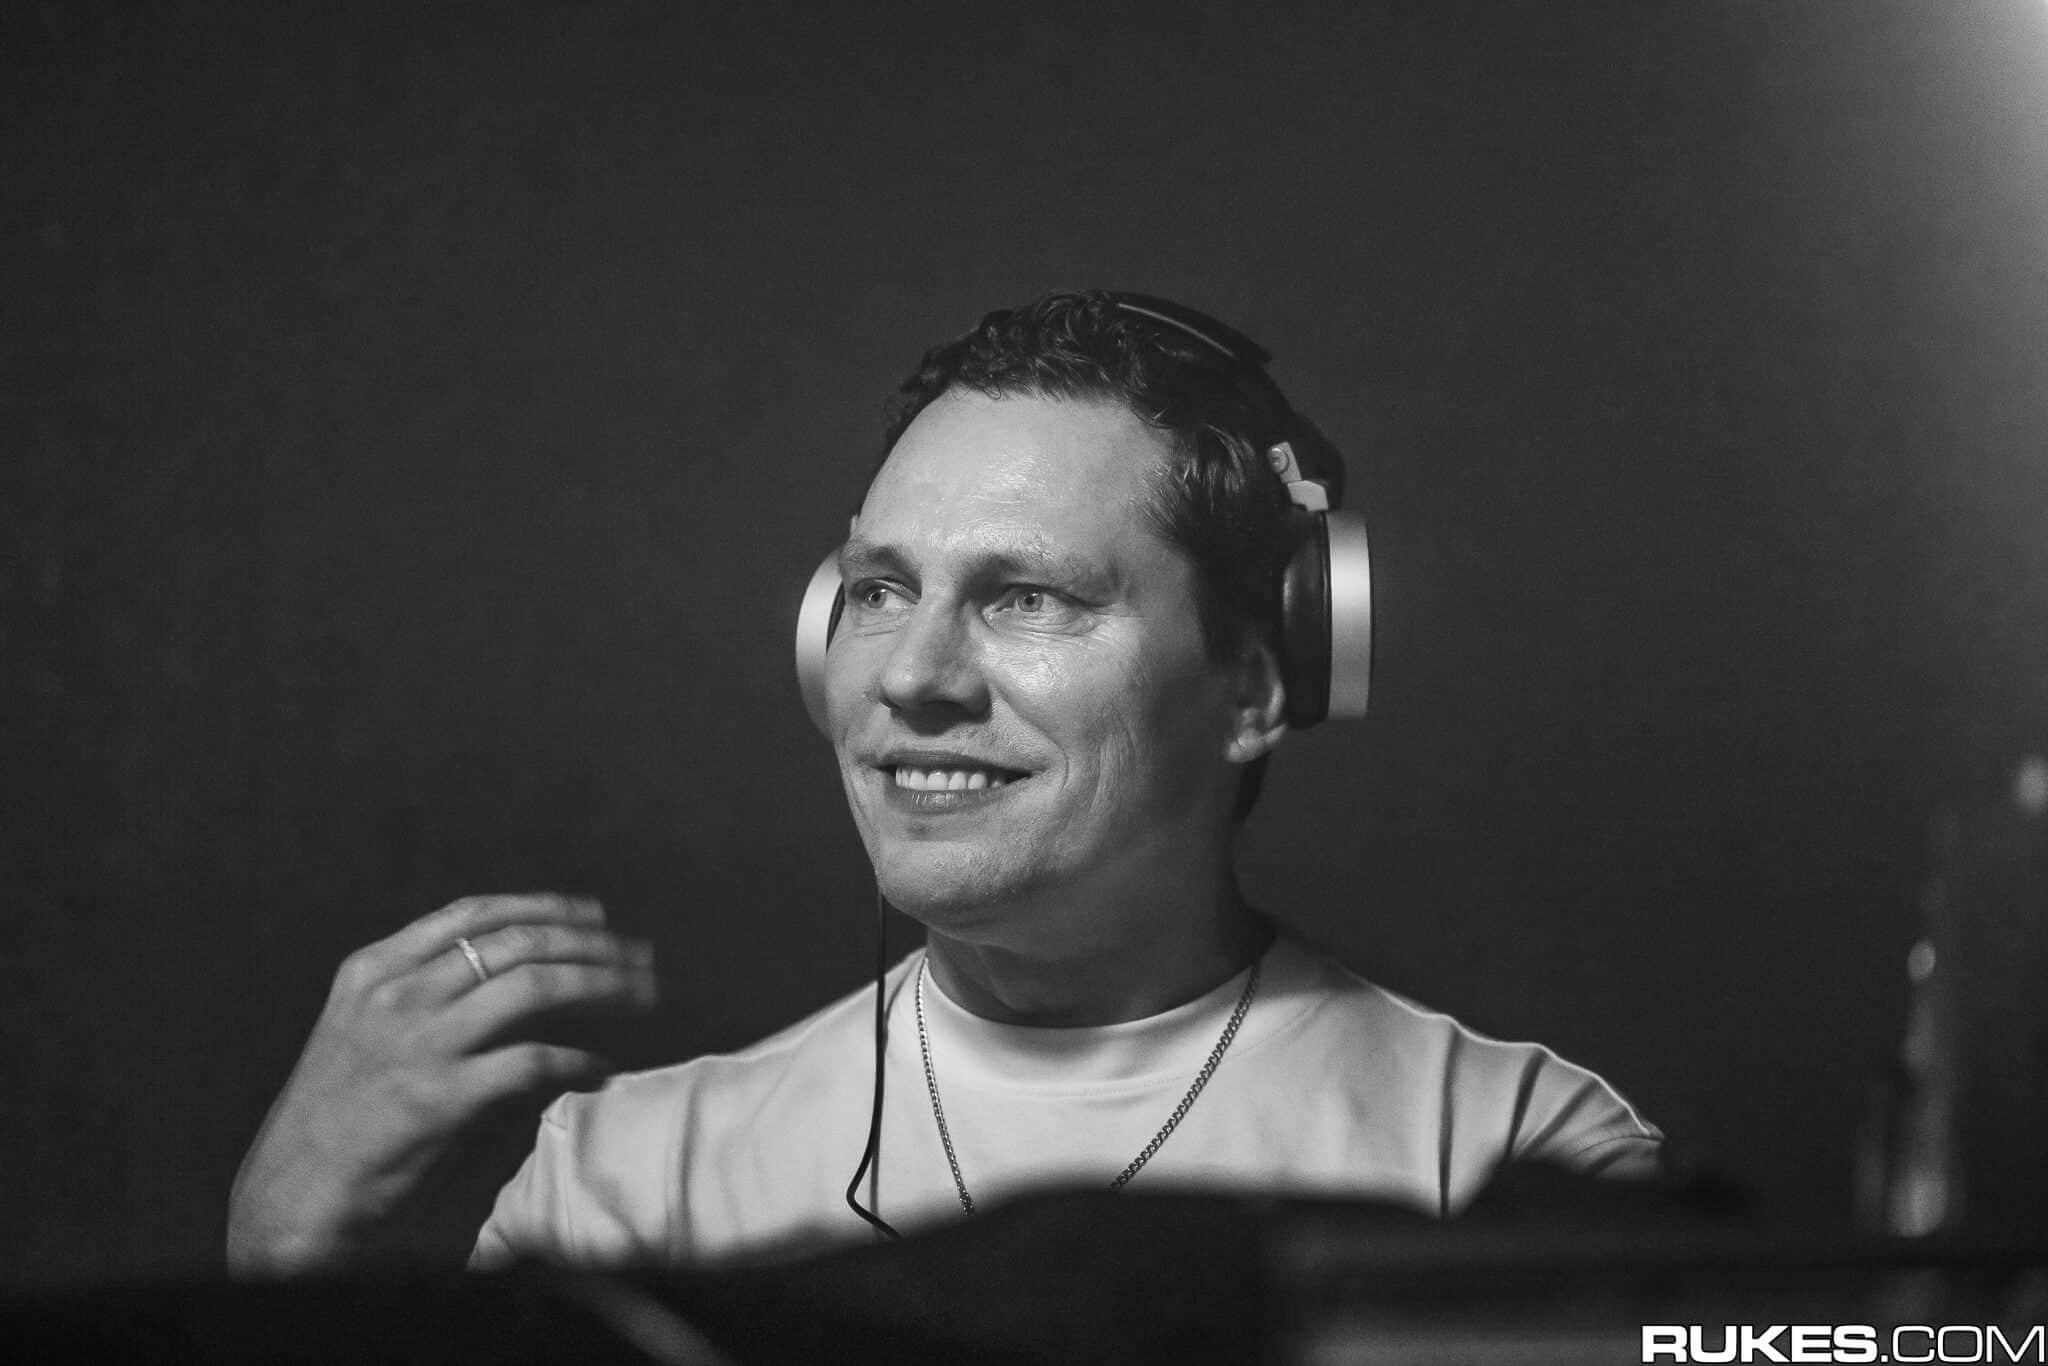 Tiësto announces global summer live dates alongside forthcoming single